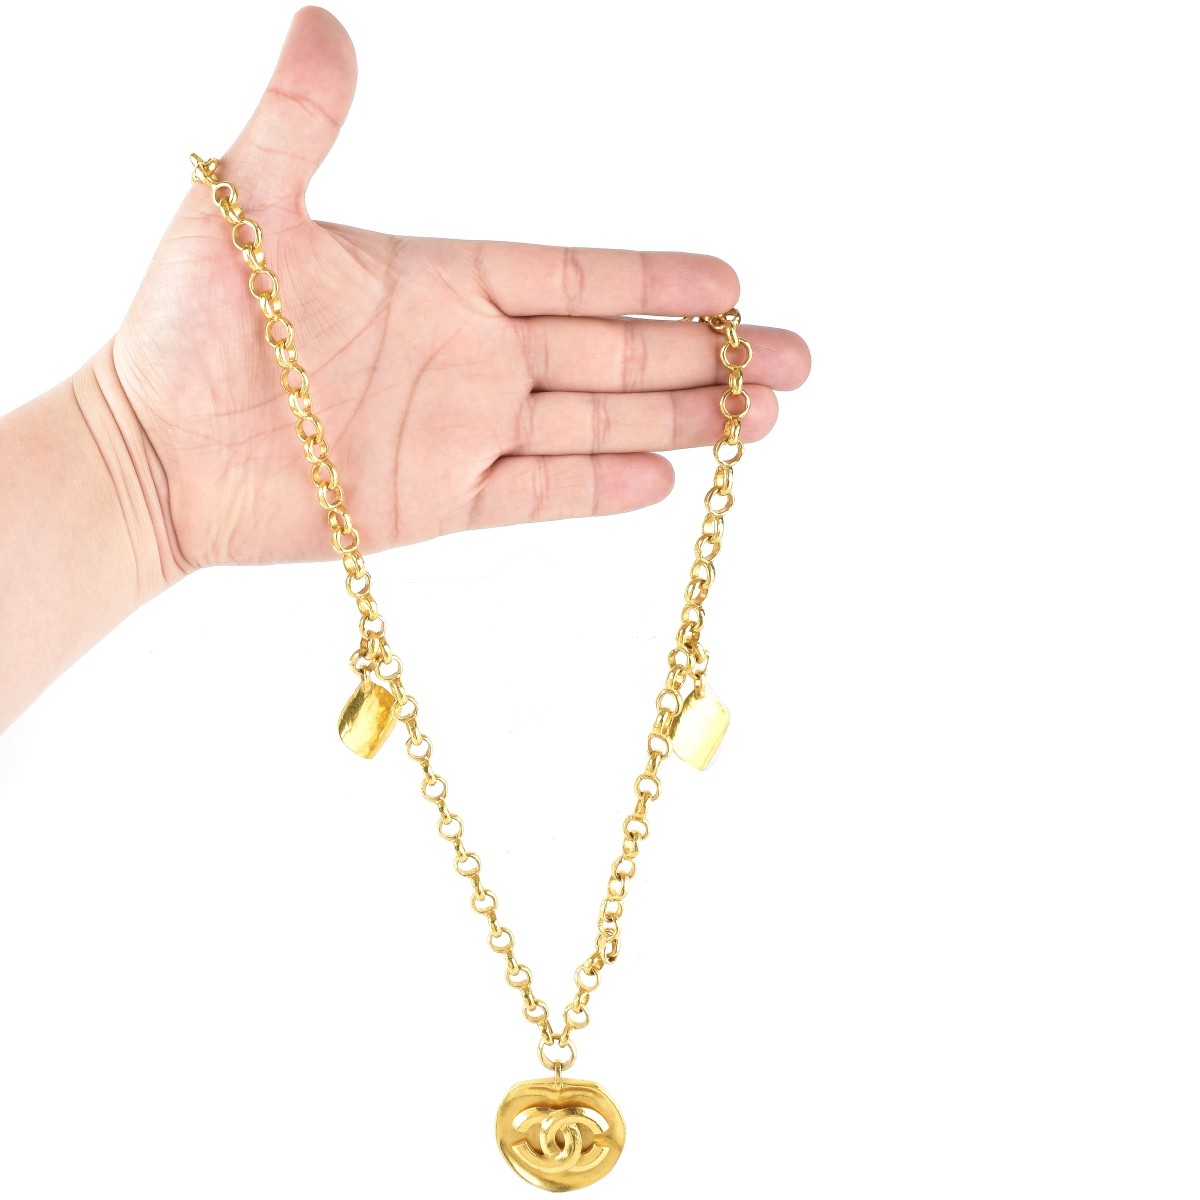 Chanel Gold Tone Logo Necklace